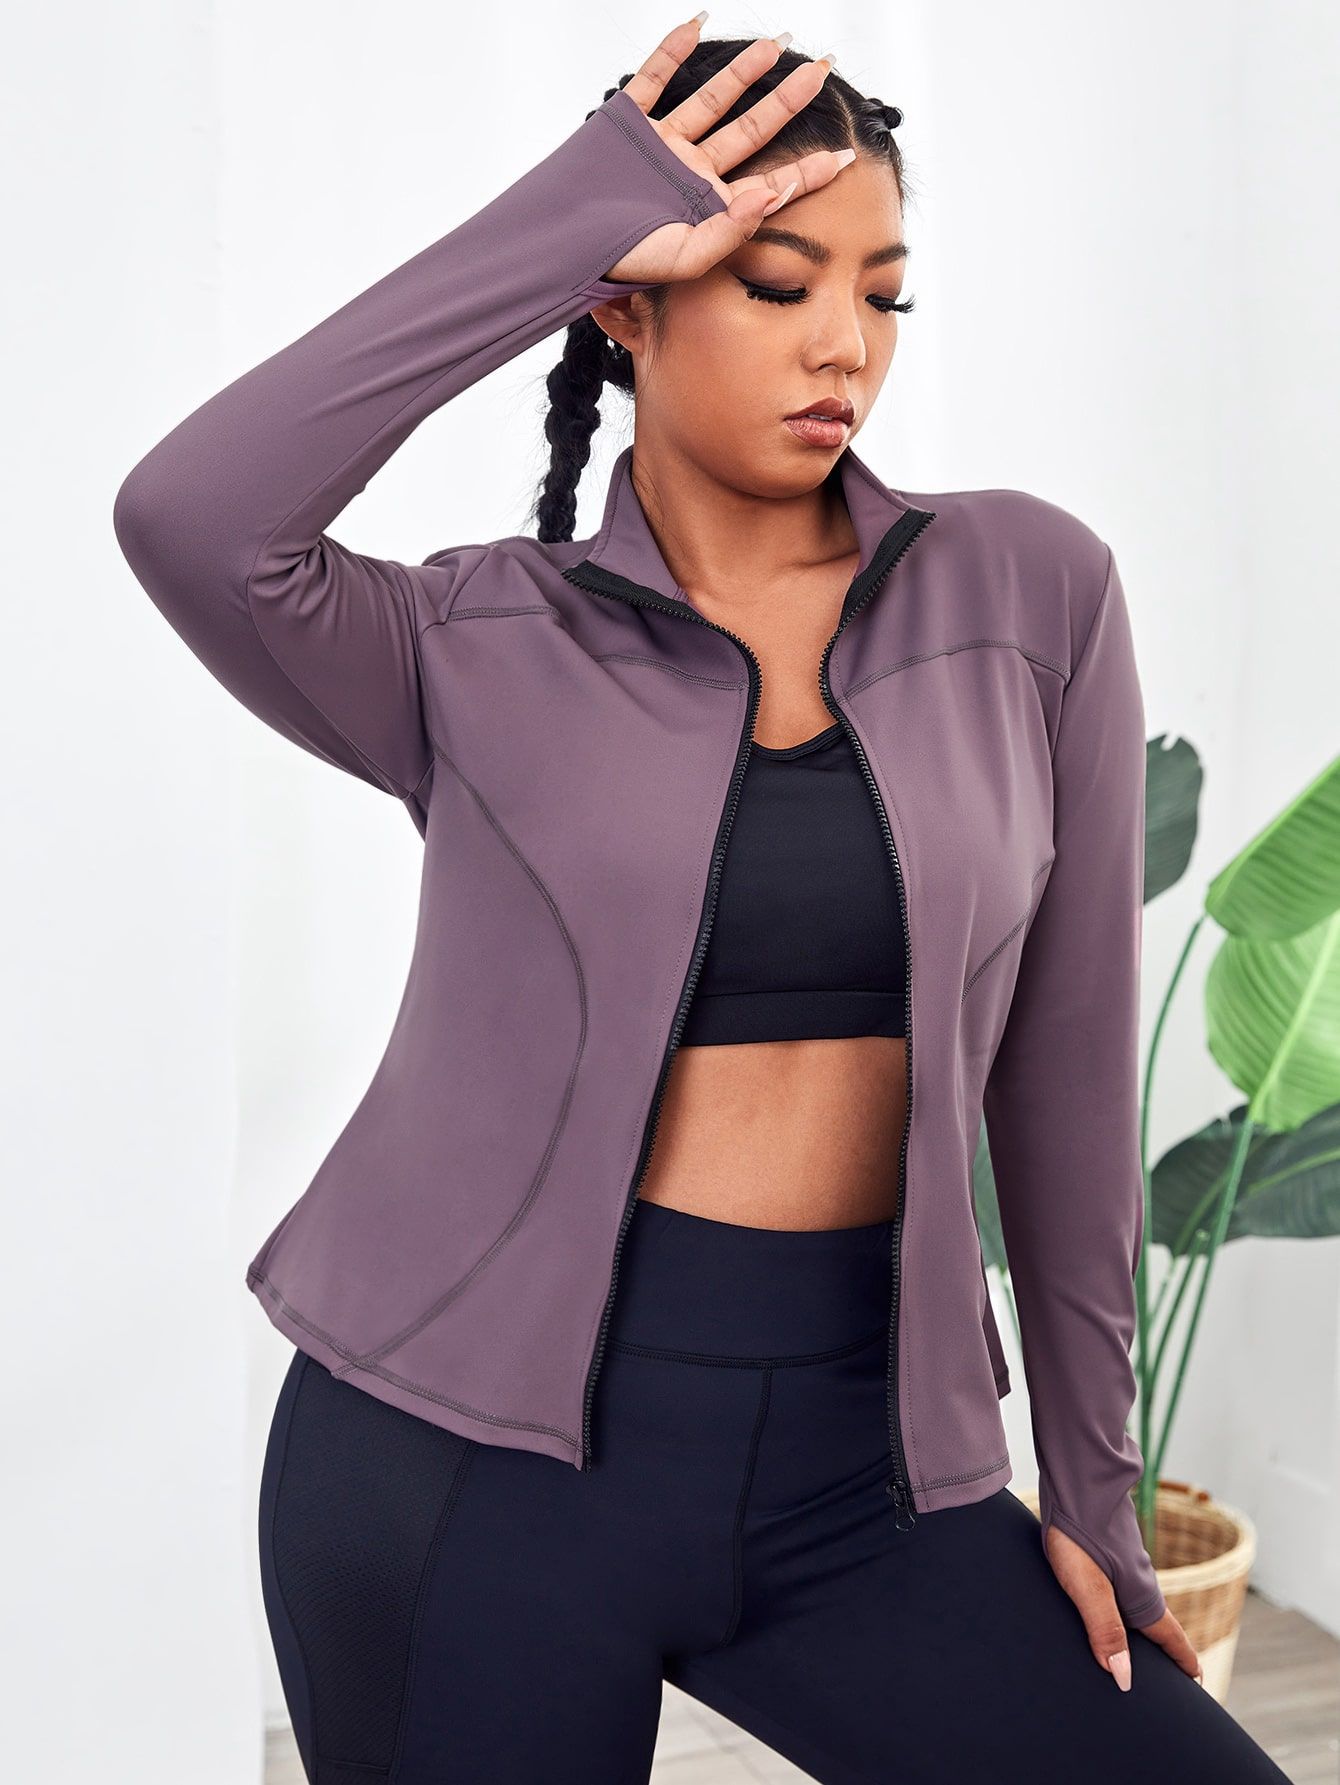 Plus Contrast Stitching Zip Up Sports Jacket With Thumb Holes | SHEIN